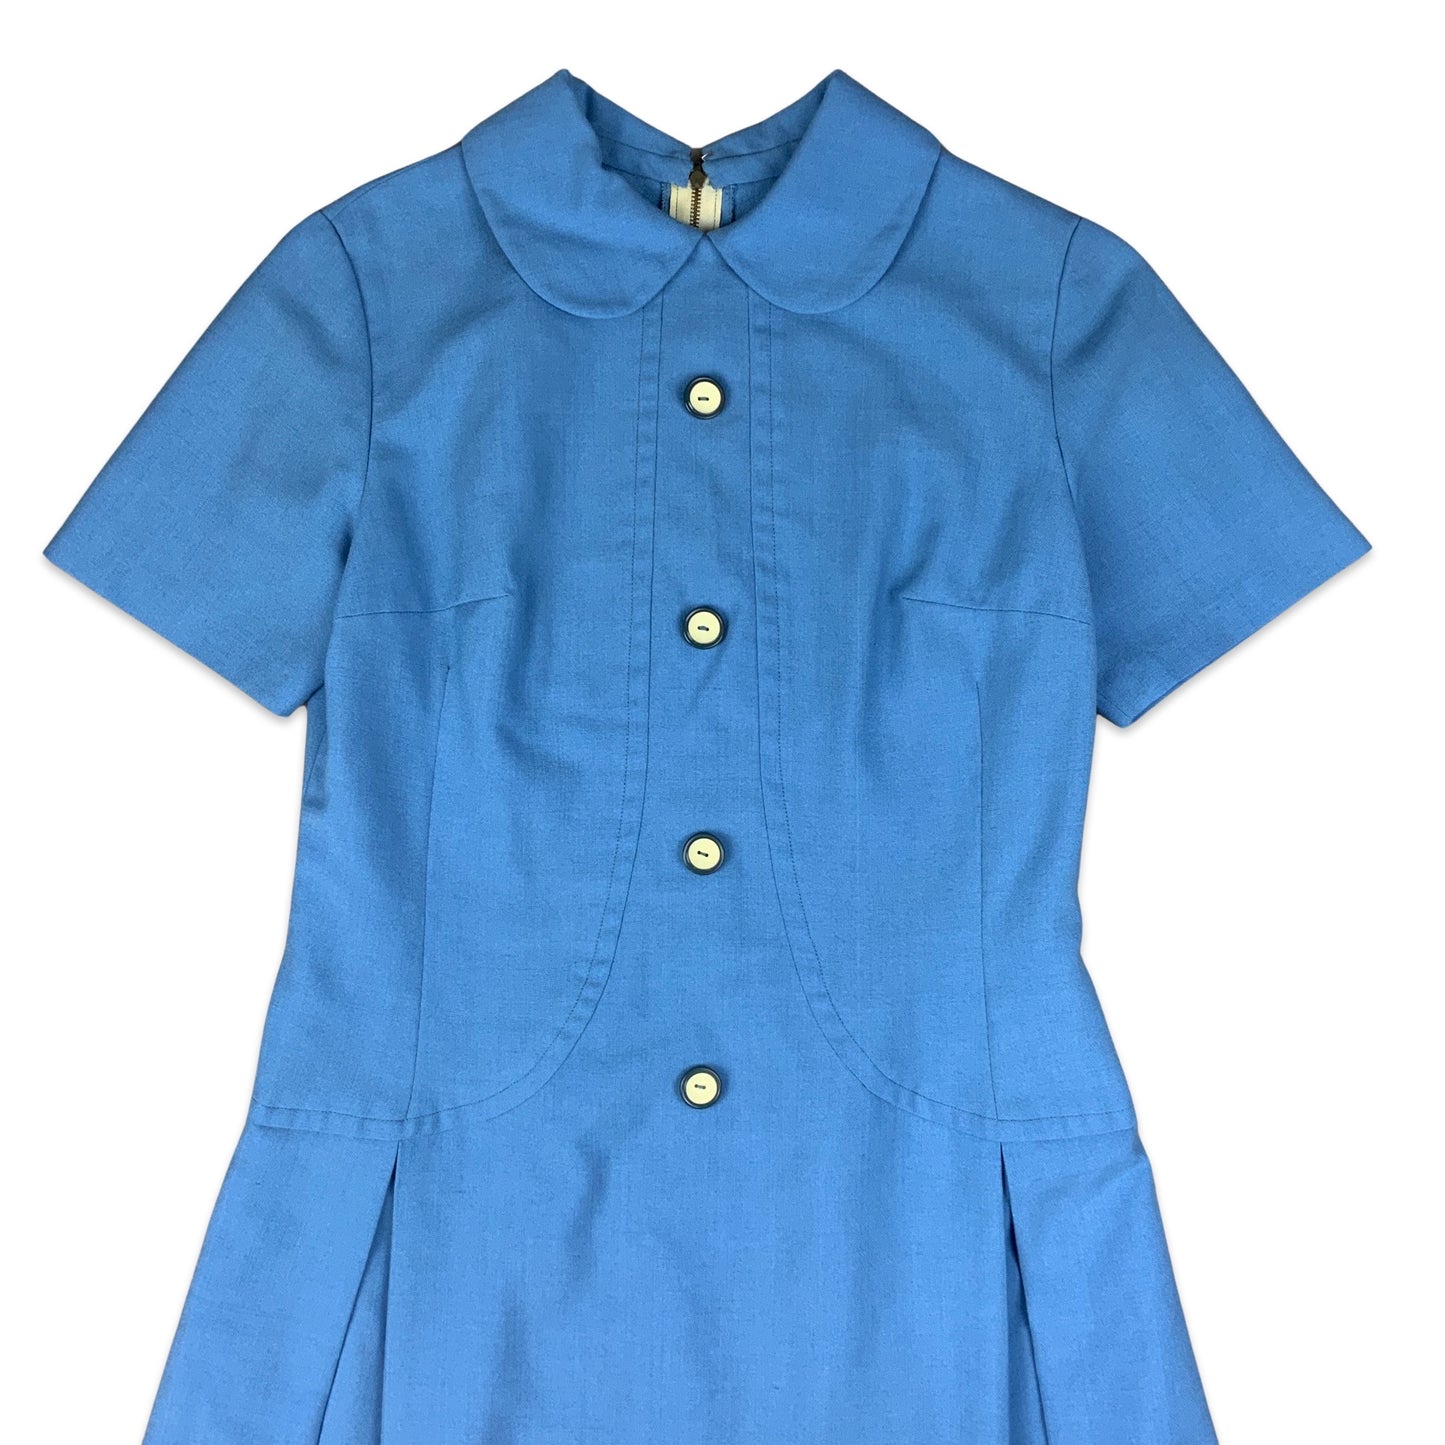 Vintage 60s Blue A Line Dress with Peter Pan Collar 10 12